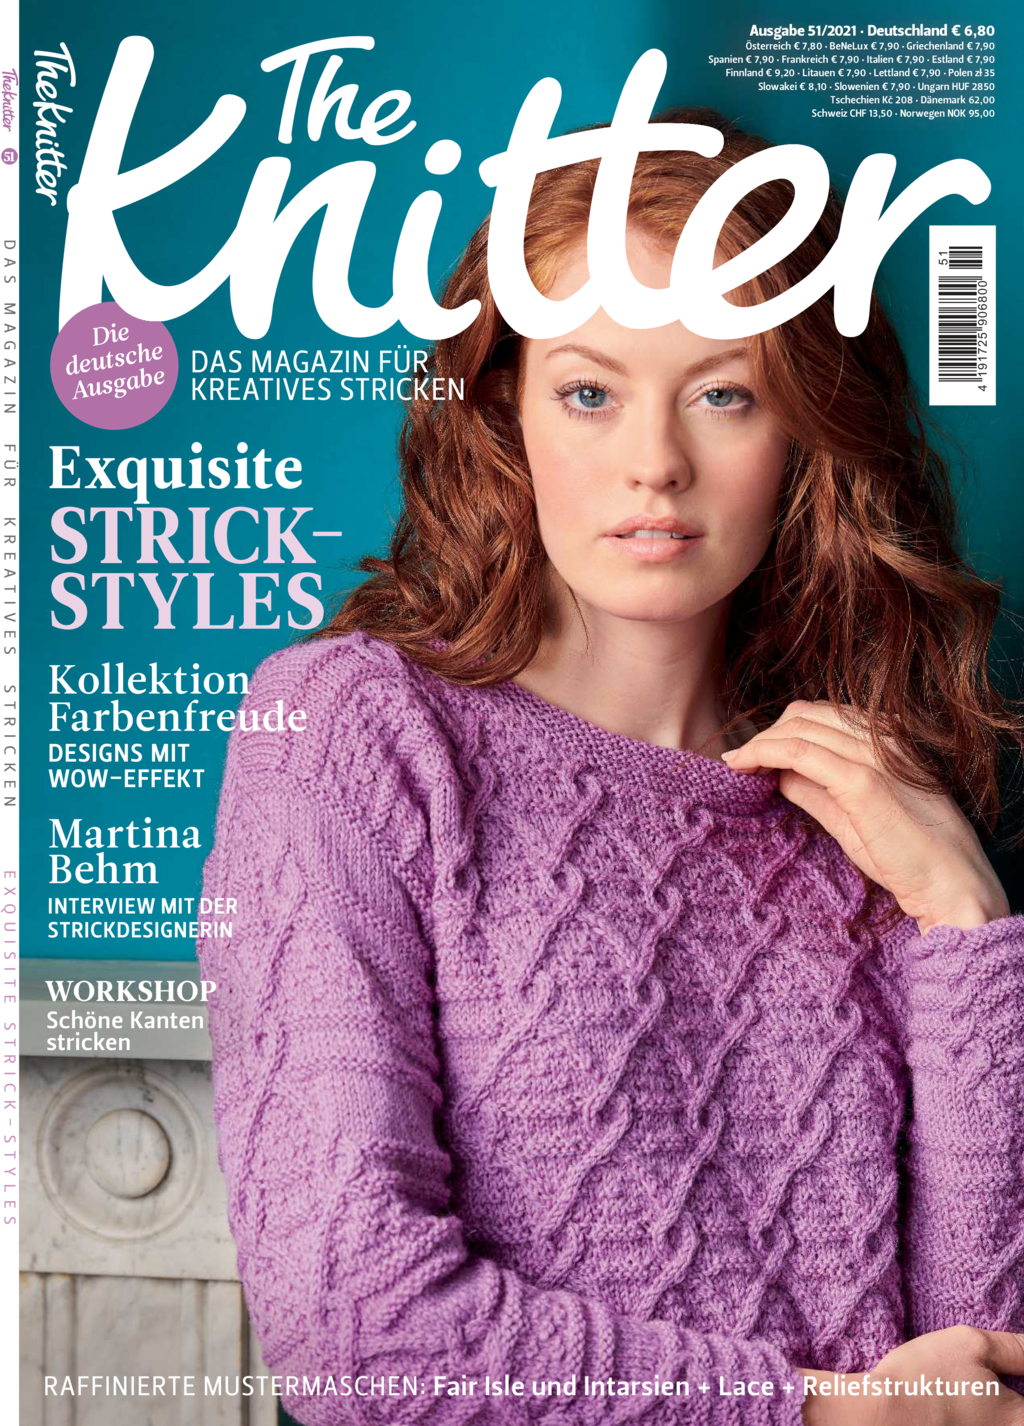 E-Paper: The Knitter 51/2021 - Exquisite Strick-Styles